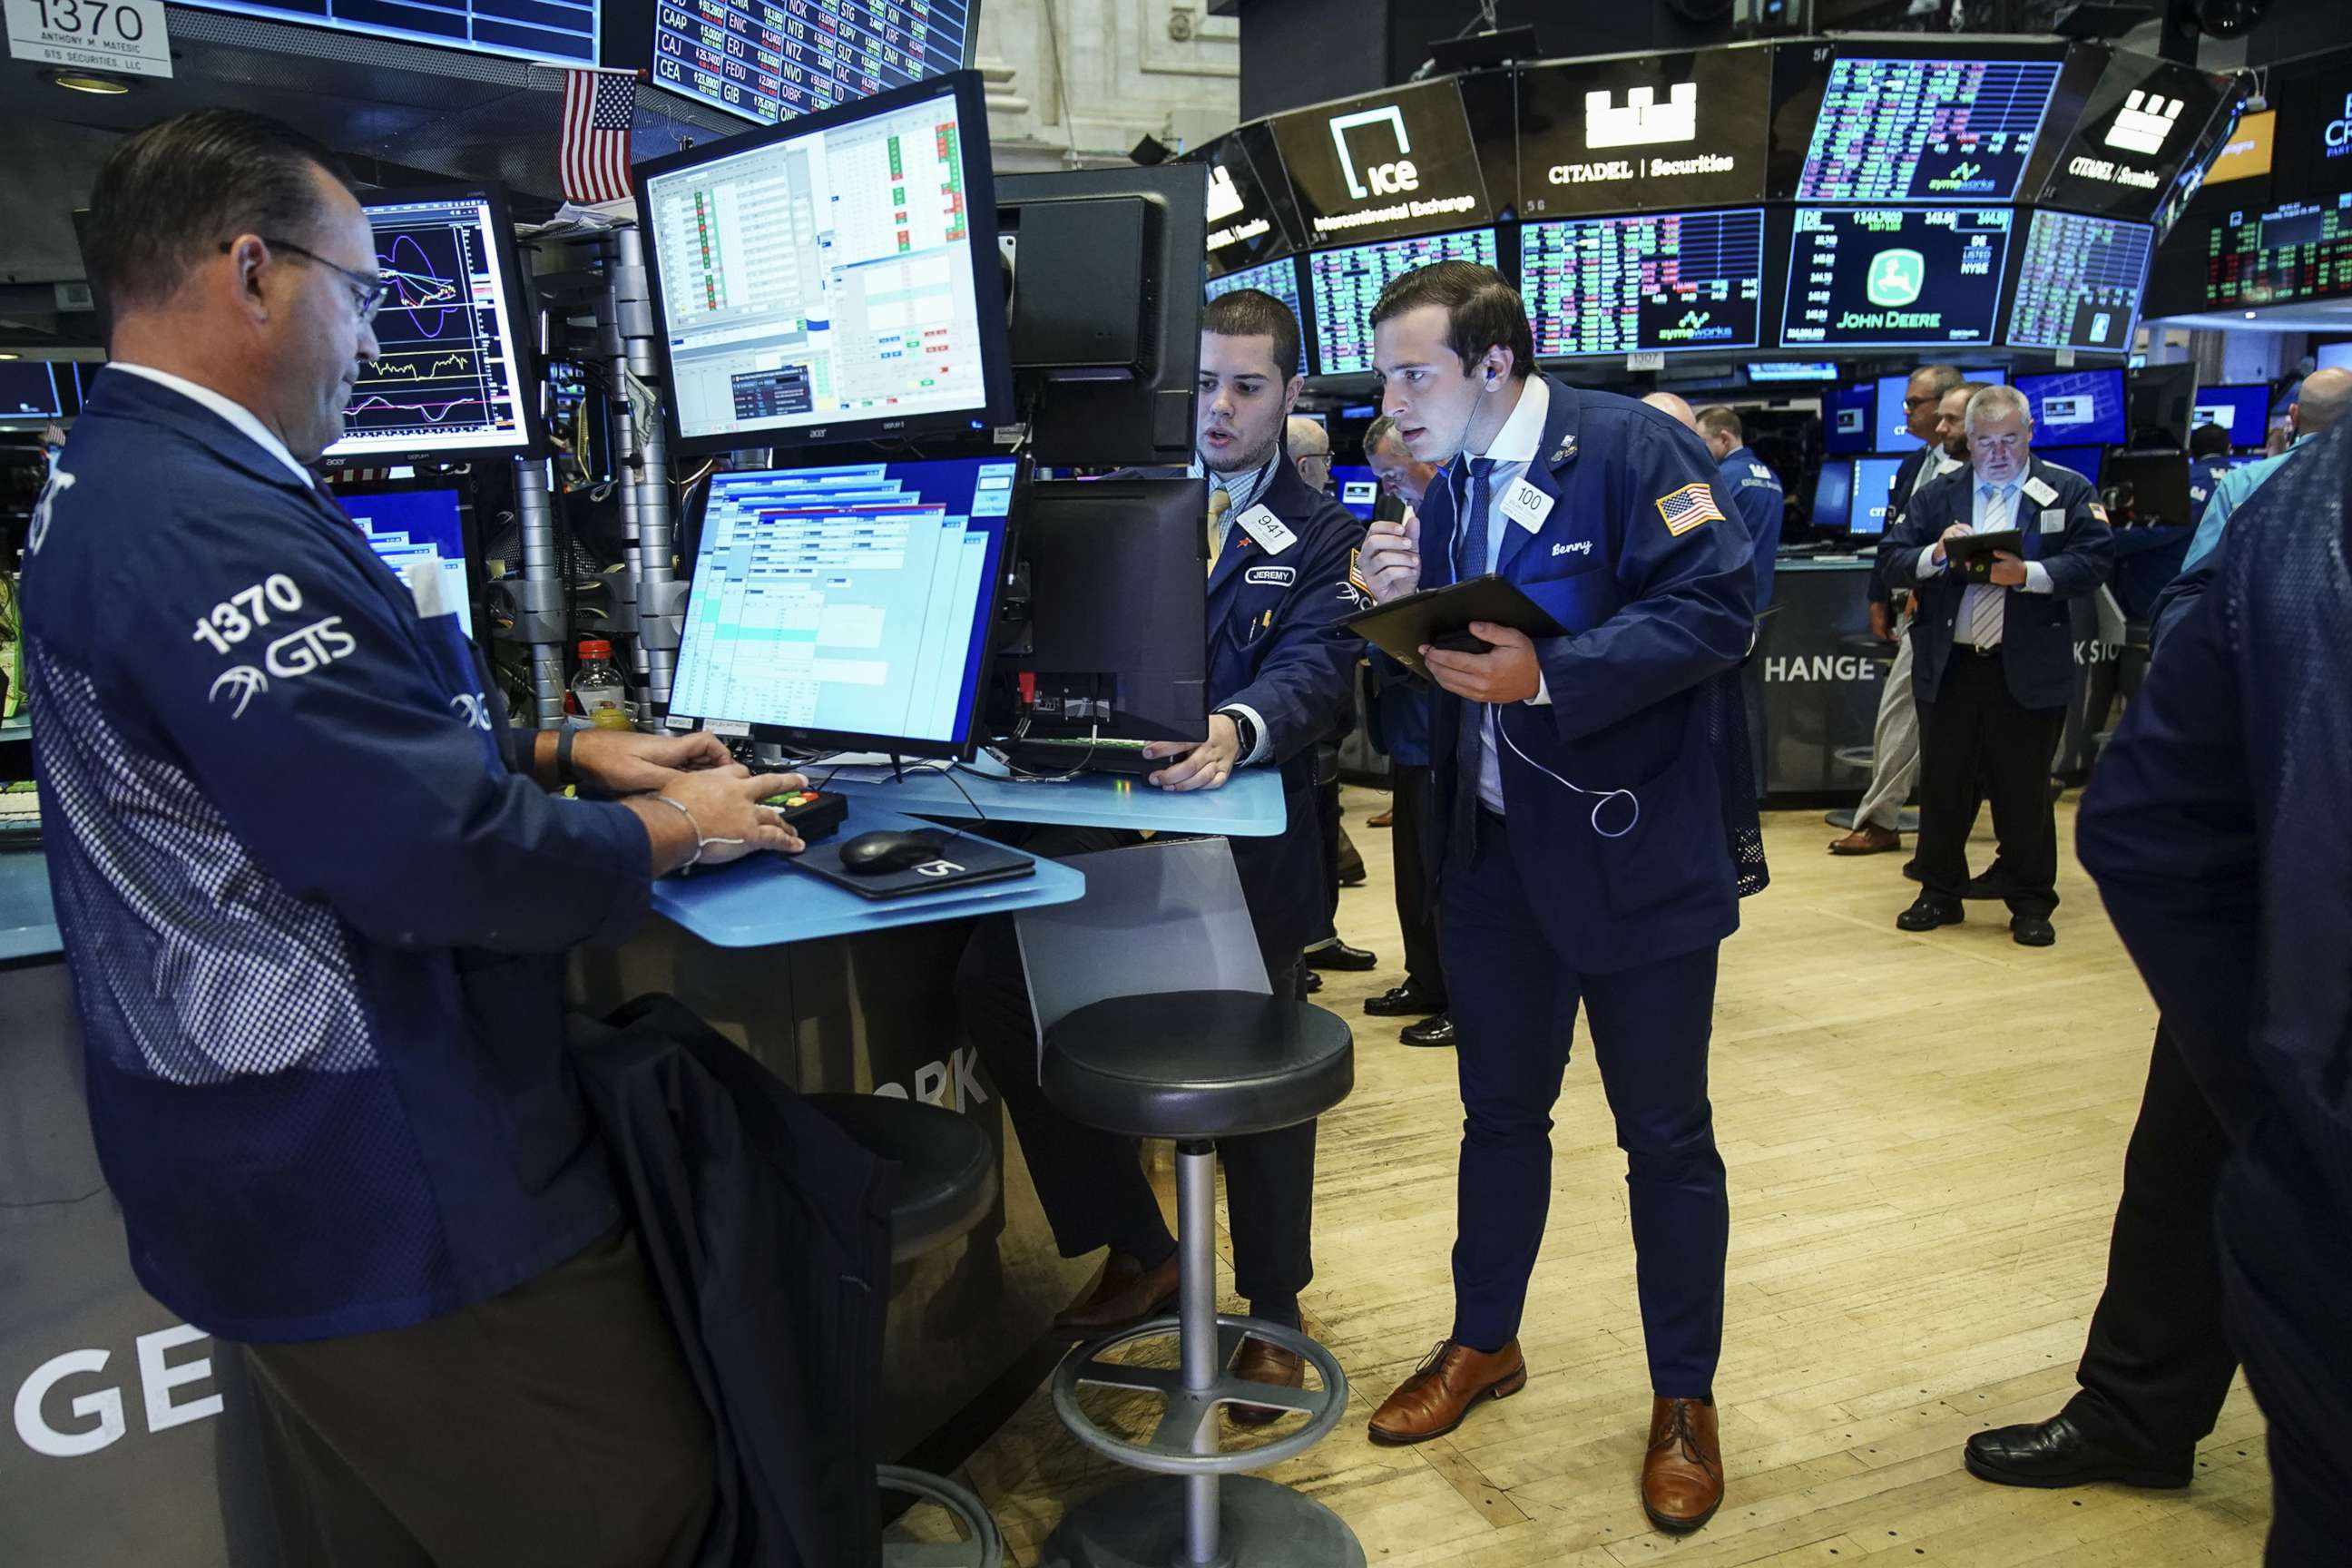 PHOTO: Traders and financial professionals work on the floor of the New York Stock Exchange at the opening bell on August 15, 2019, in New York.